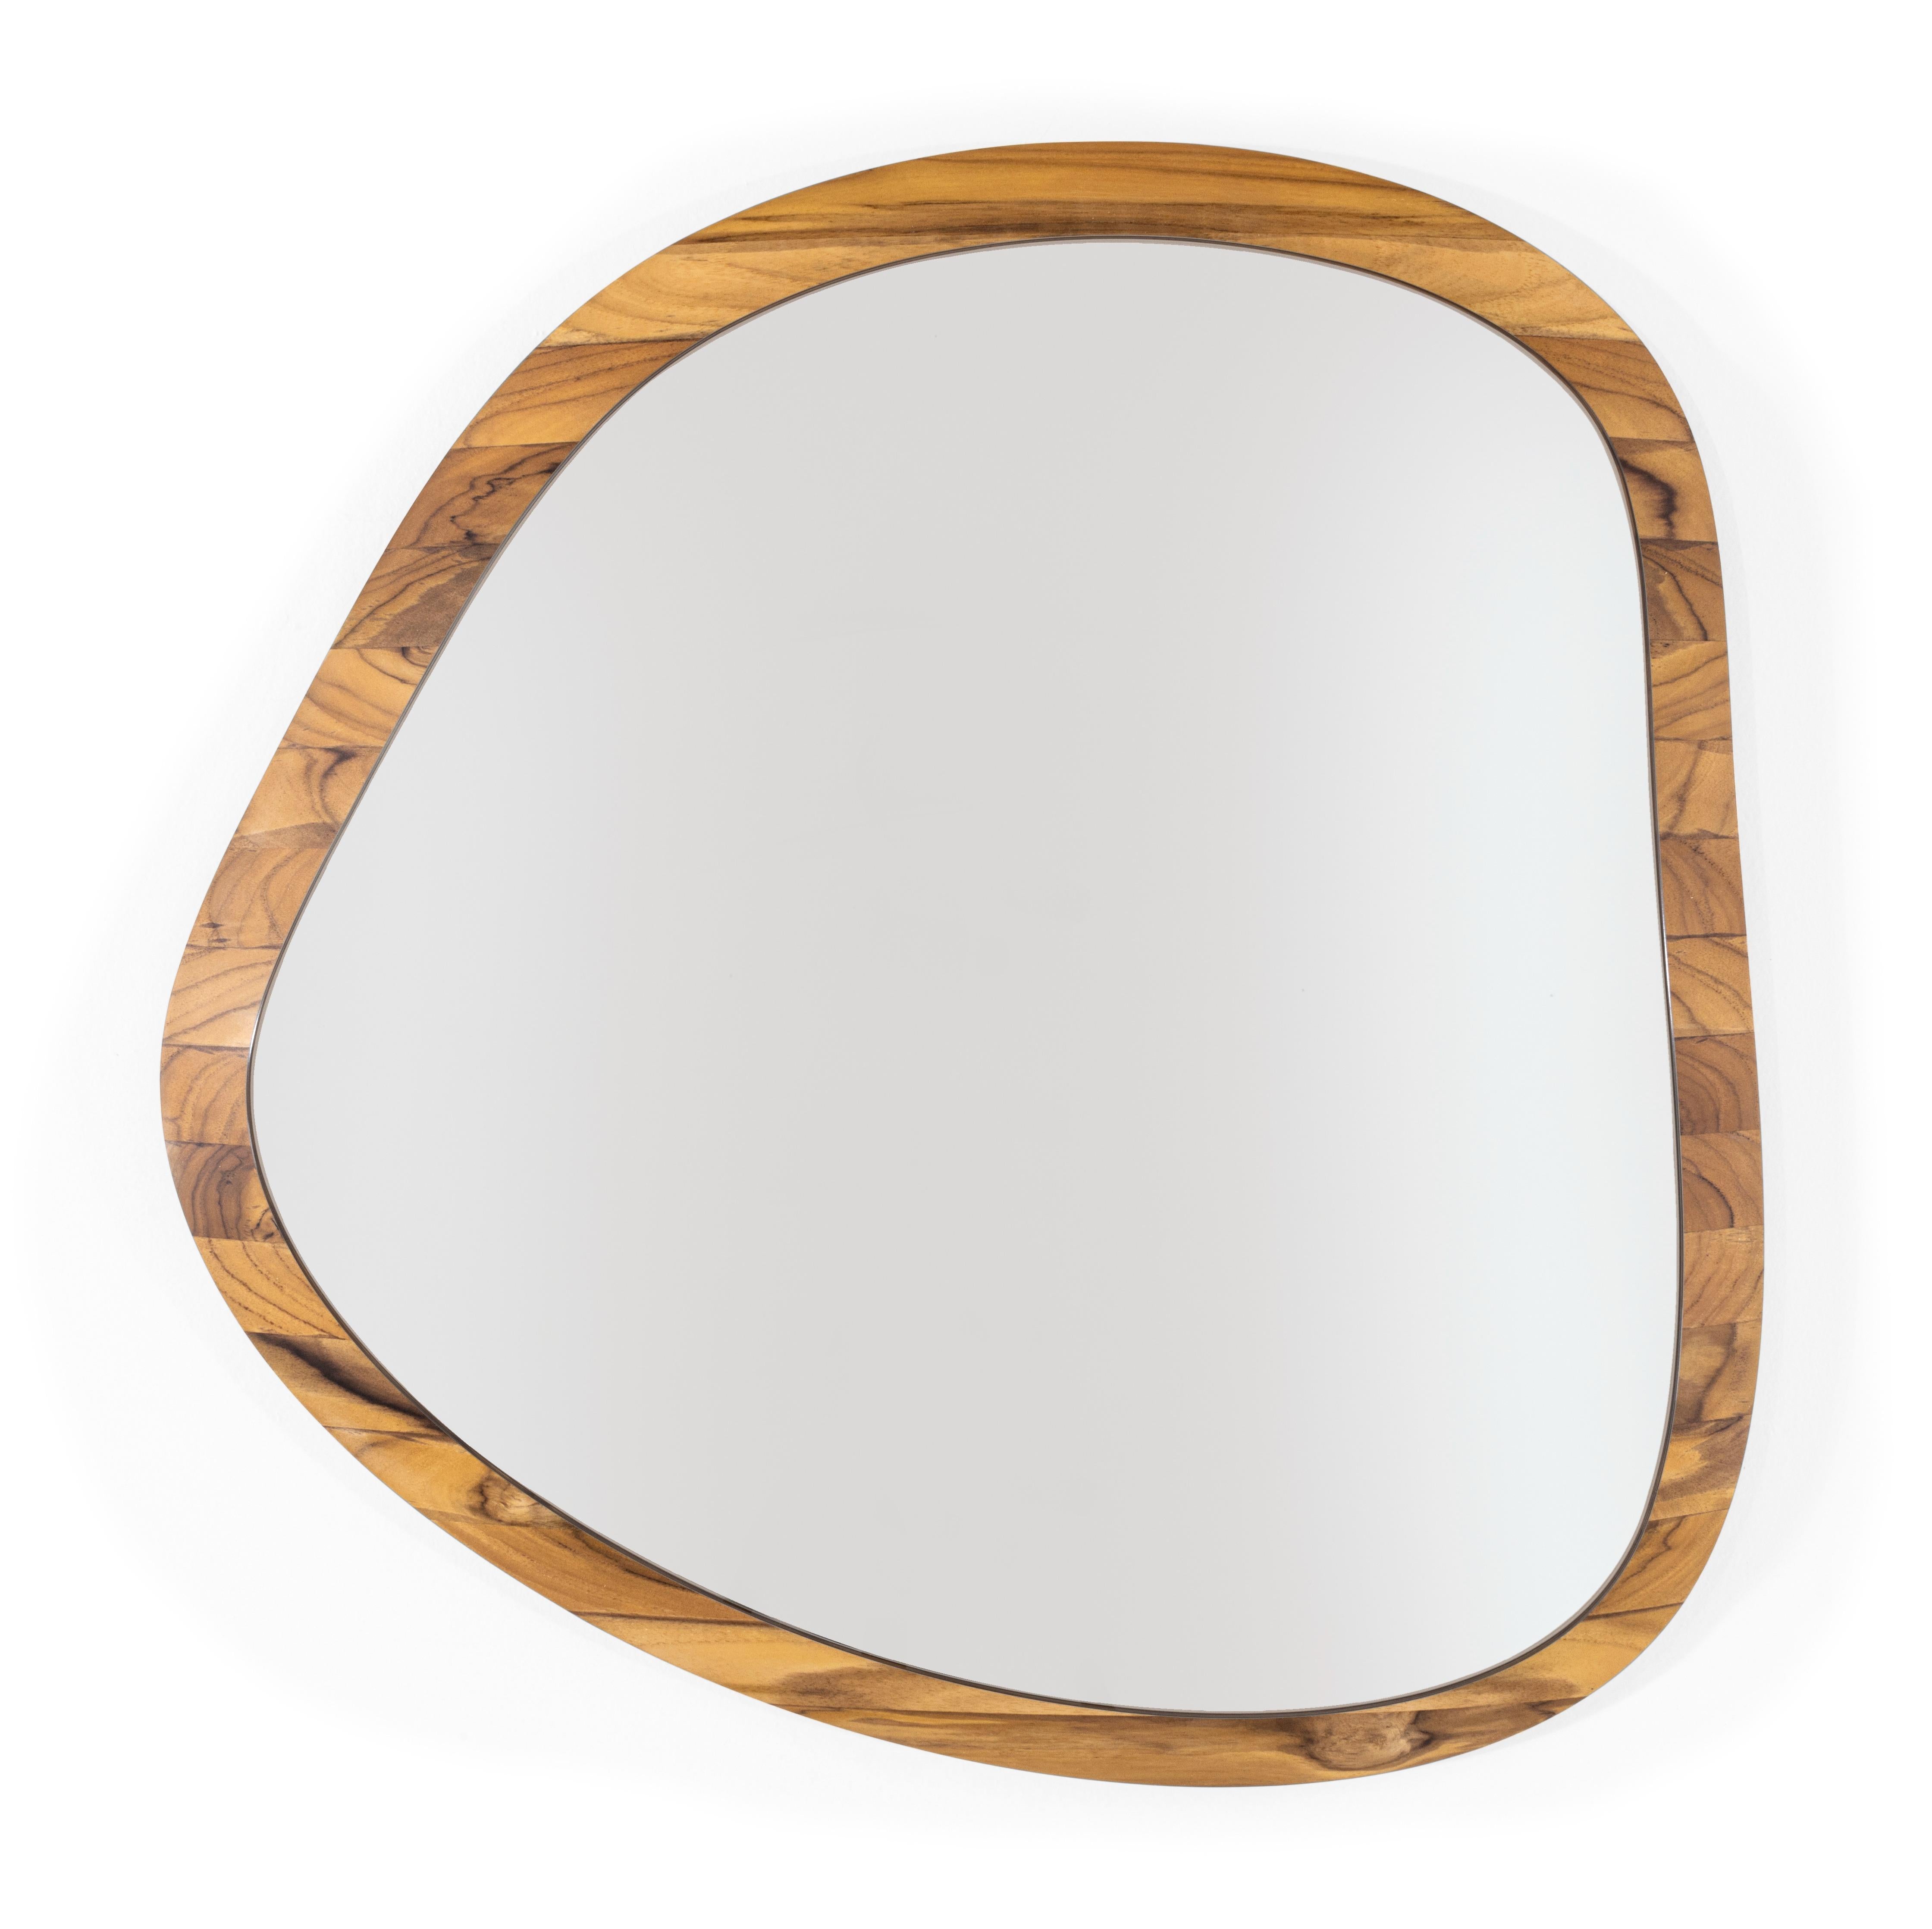 The organic shapes that form the Pantê series of mirrors are inspired by the pattern of spots seen on a jaguar’s coat. The woodwork design frames the mirror, incorporating elements of nature into the home. The solid wood of the frame incorporated